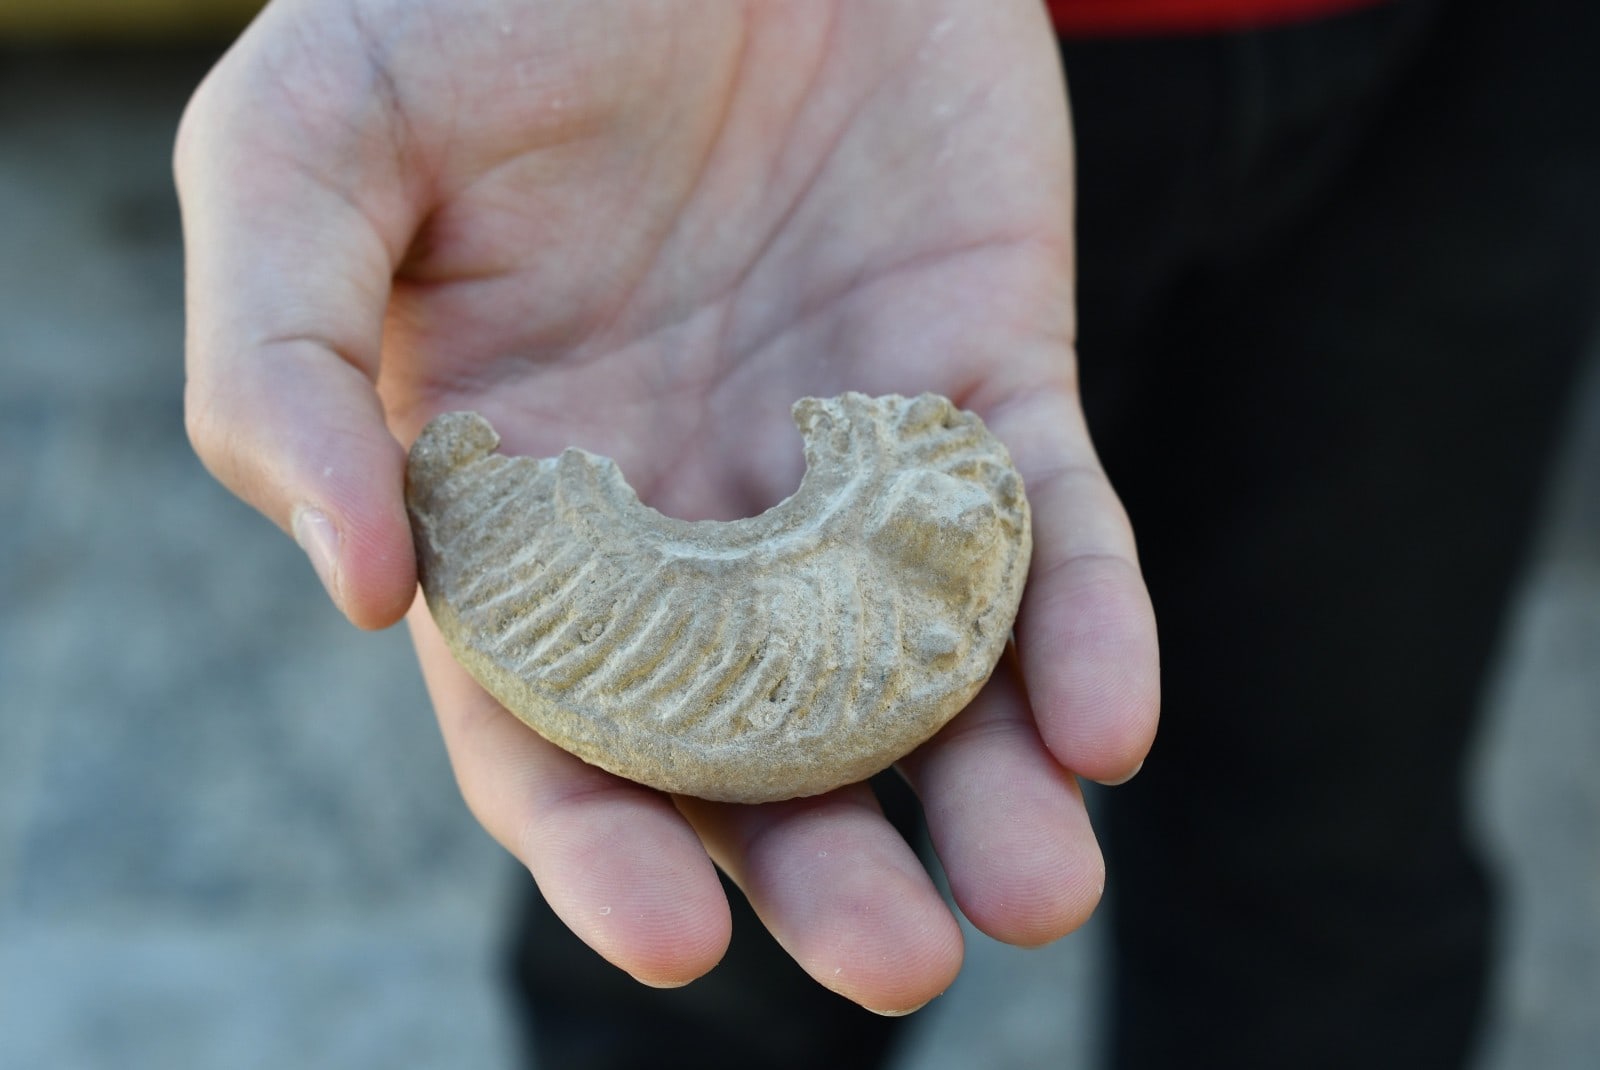 The 1,600-year-old oil lamp. Photo by Yoli Schwartz/Israel Antiquities Authority